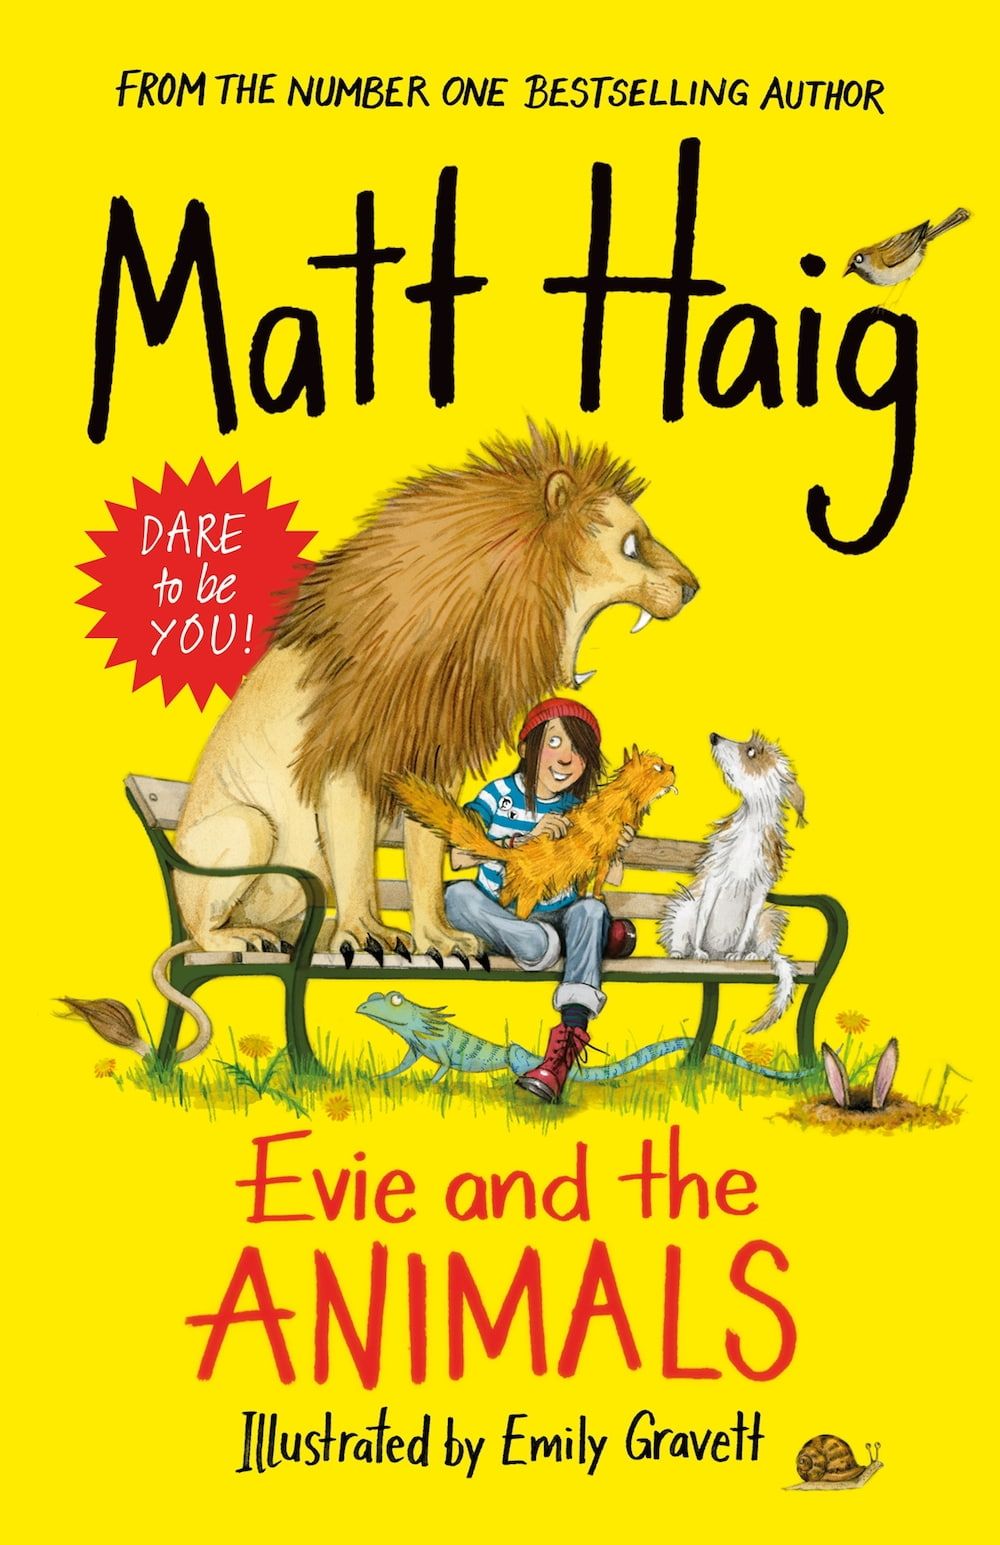 Evie and the-Animals book cover